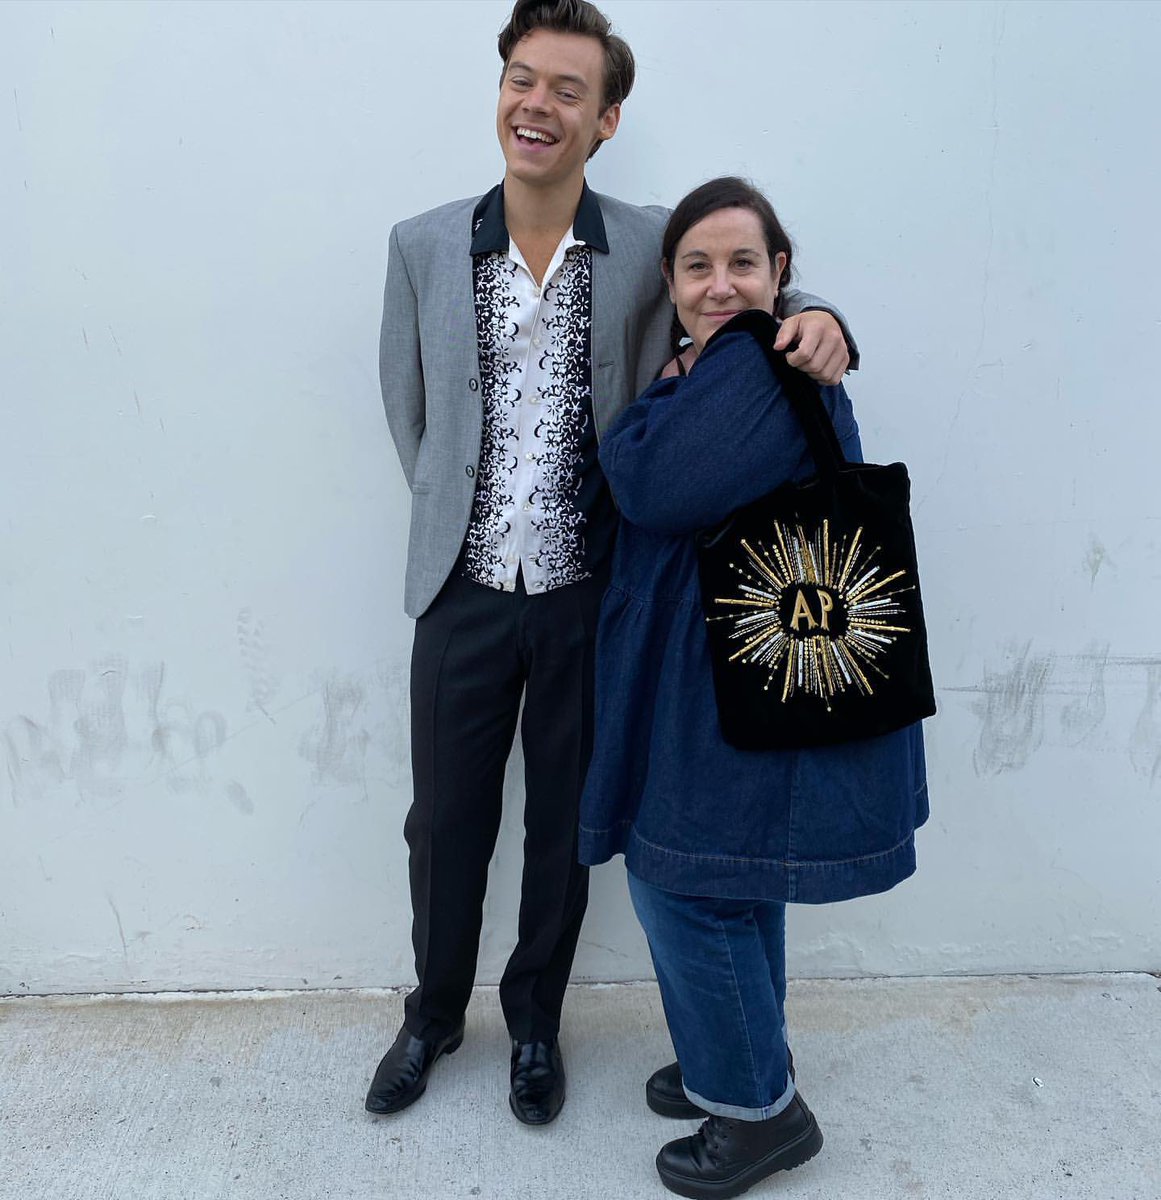 Harry and Costume Designer Arianne Phillips on the set of Don’t Worry Darling. 

📸: ariannephillips